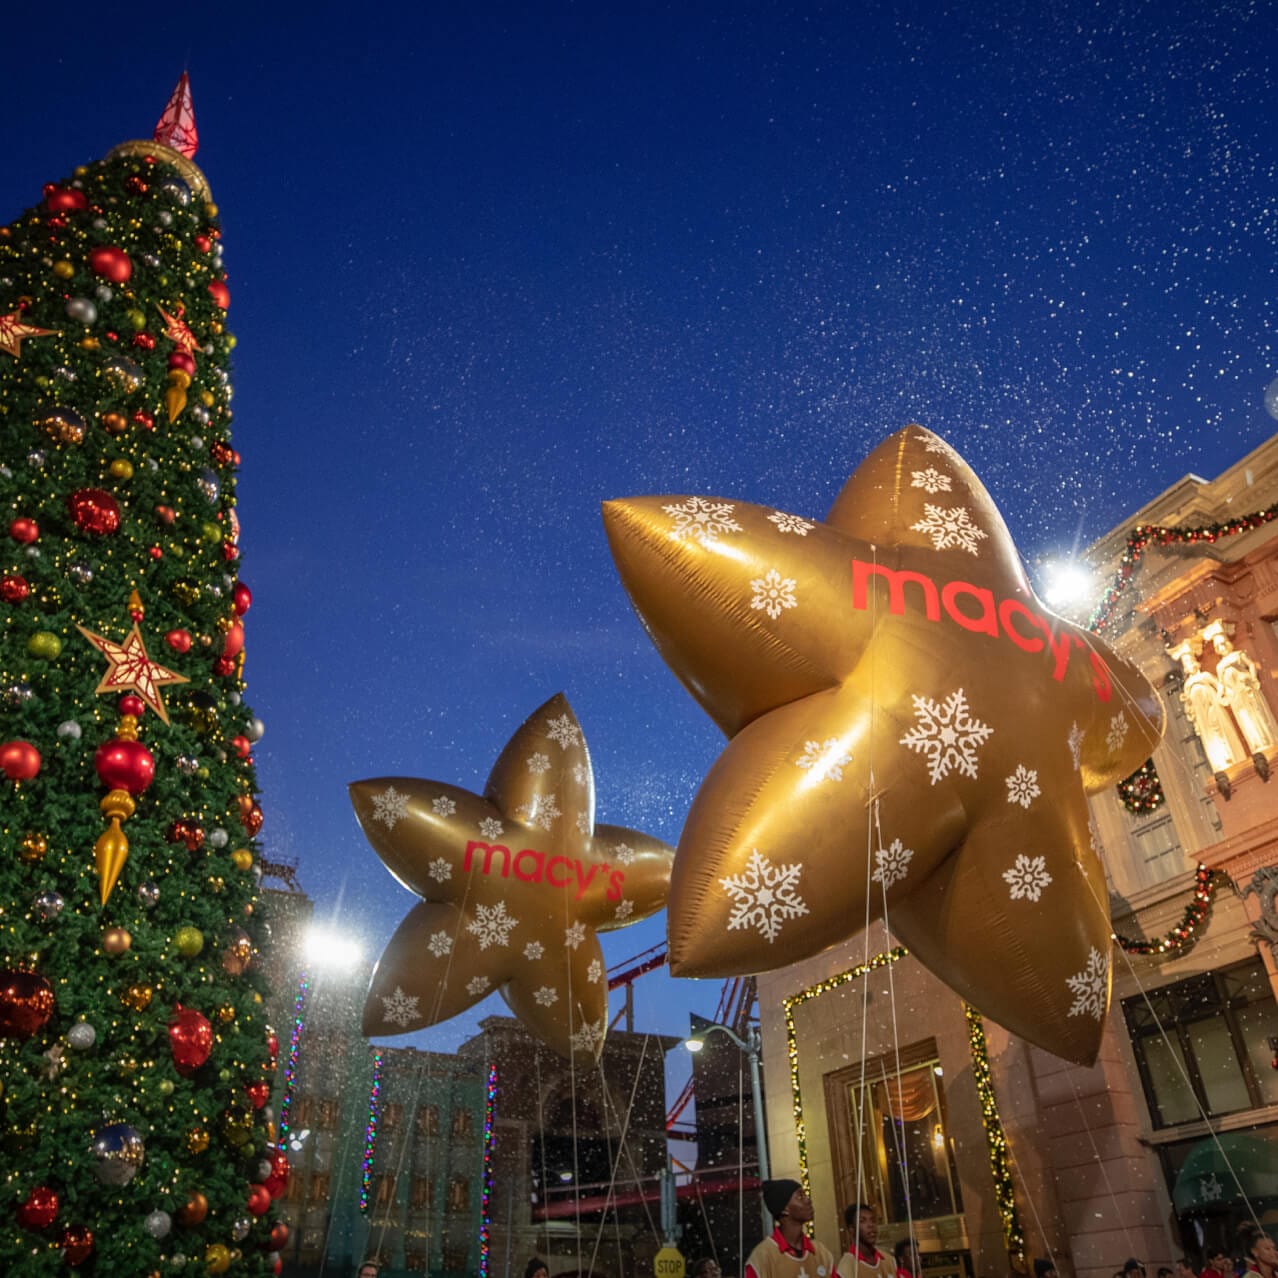 The Macy’s star balloons at Universal Studios Florida pass by a giant decorated holiday tree.